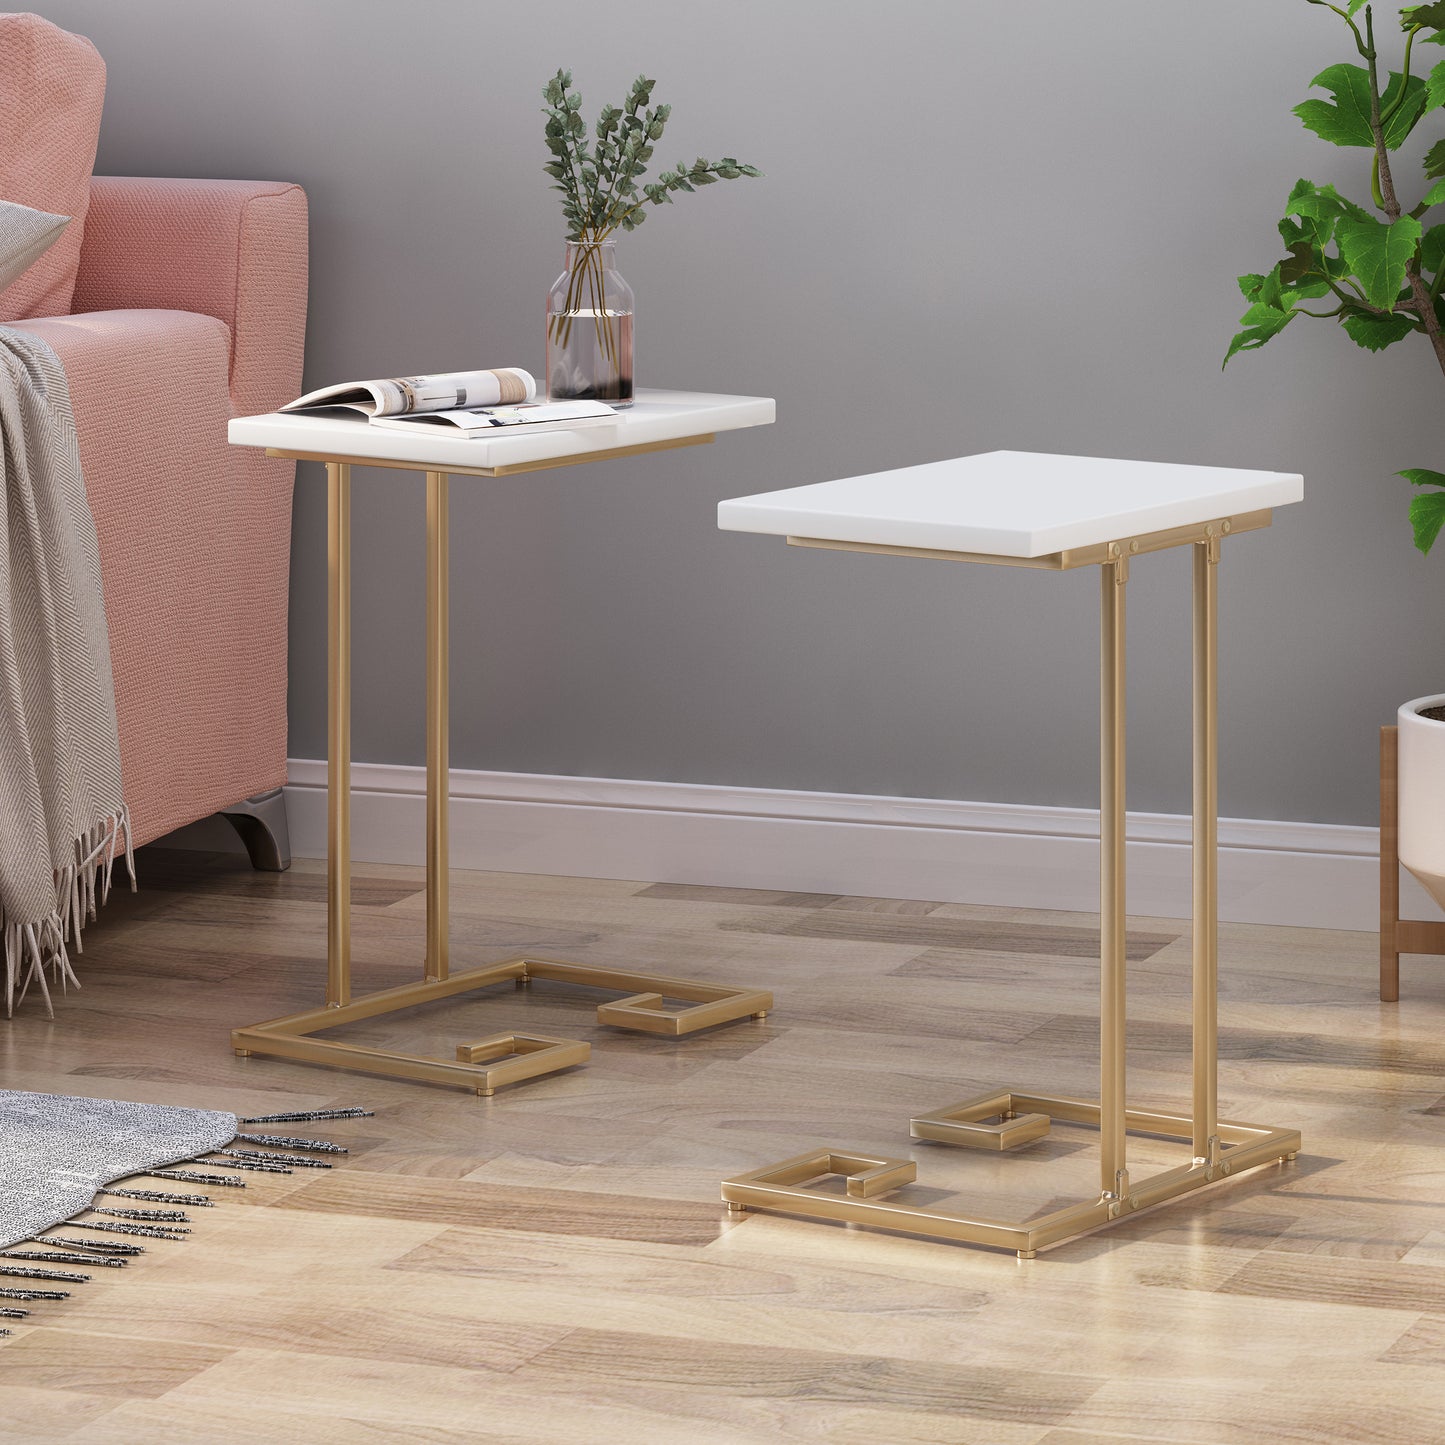 Ariade Modern Glam C Side Table, Set of 2, White and Champagne Gold